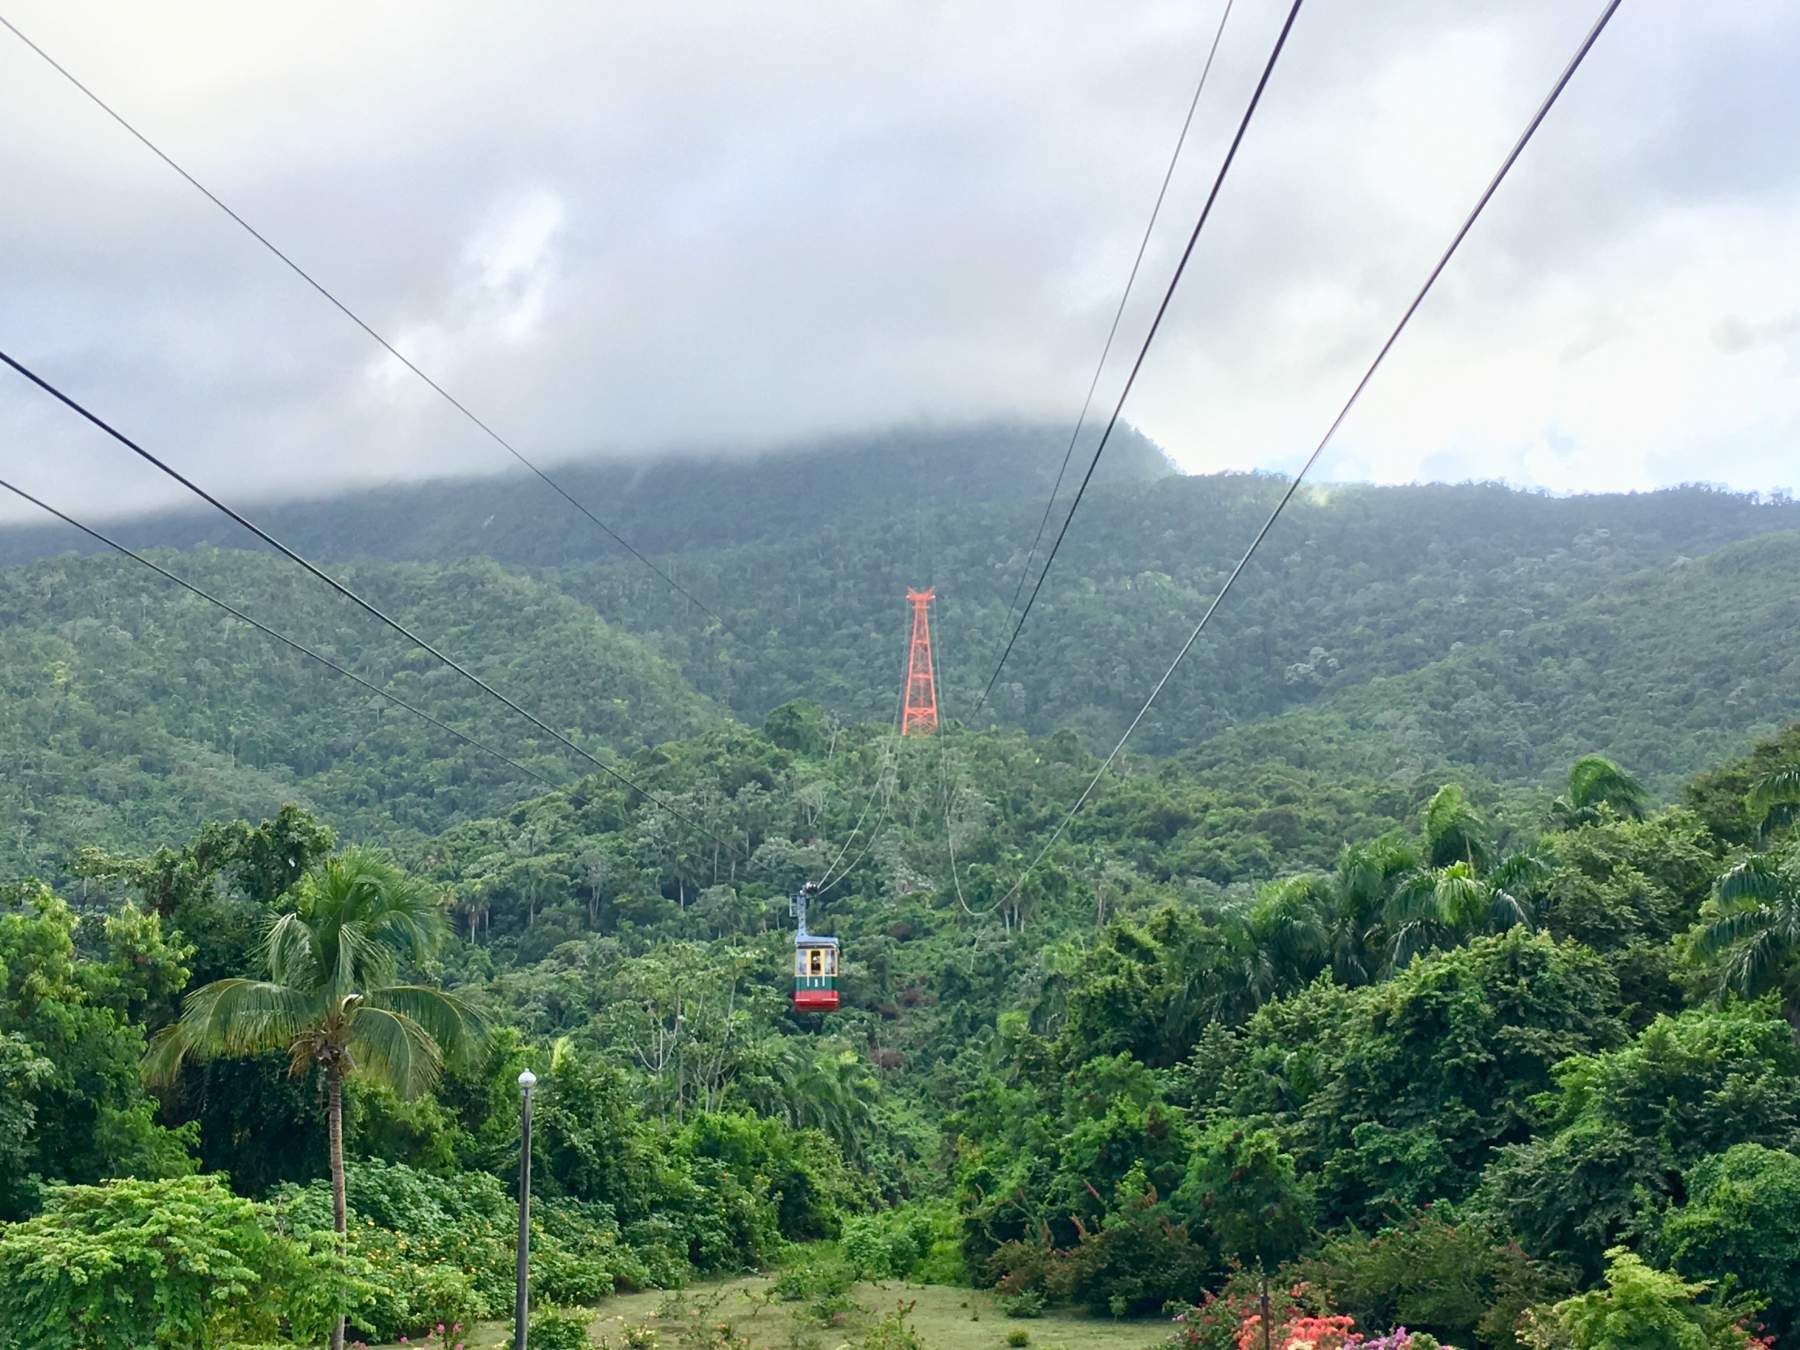 Cable car in the trees in Puerto Plata, Dominican Republic